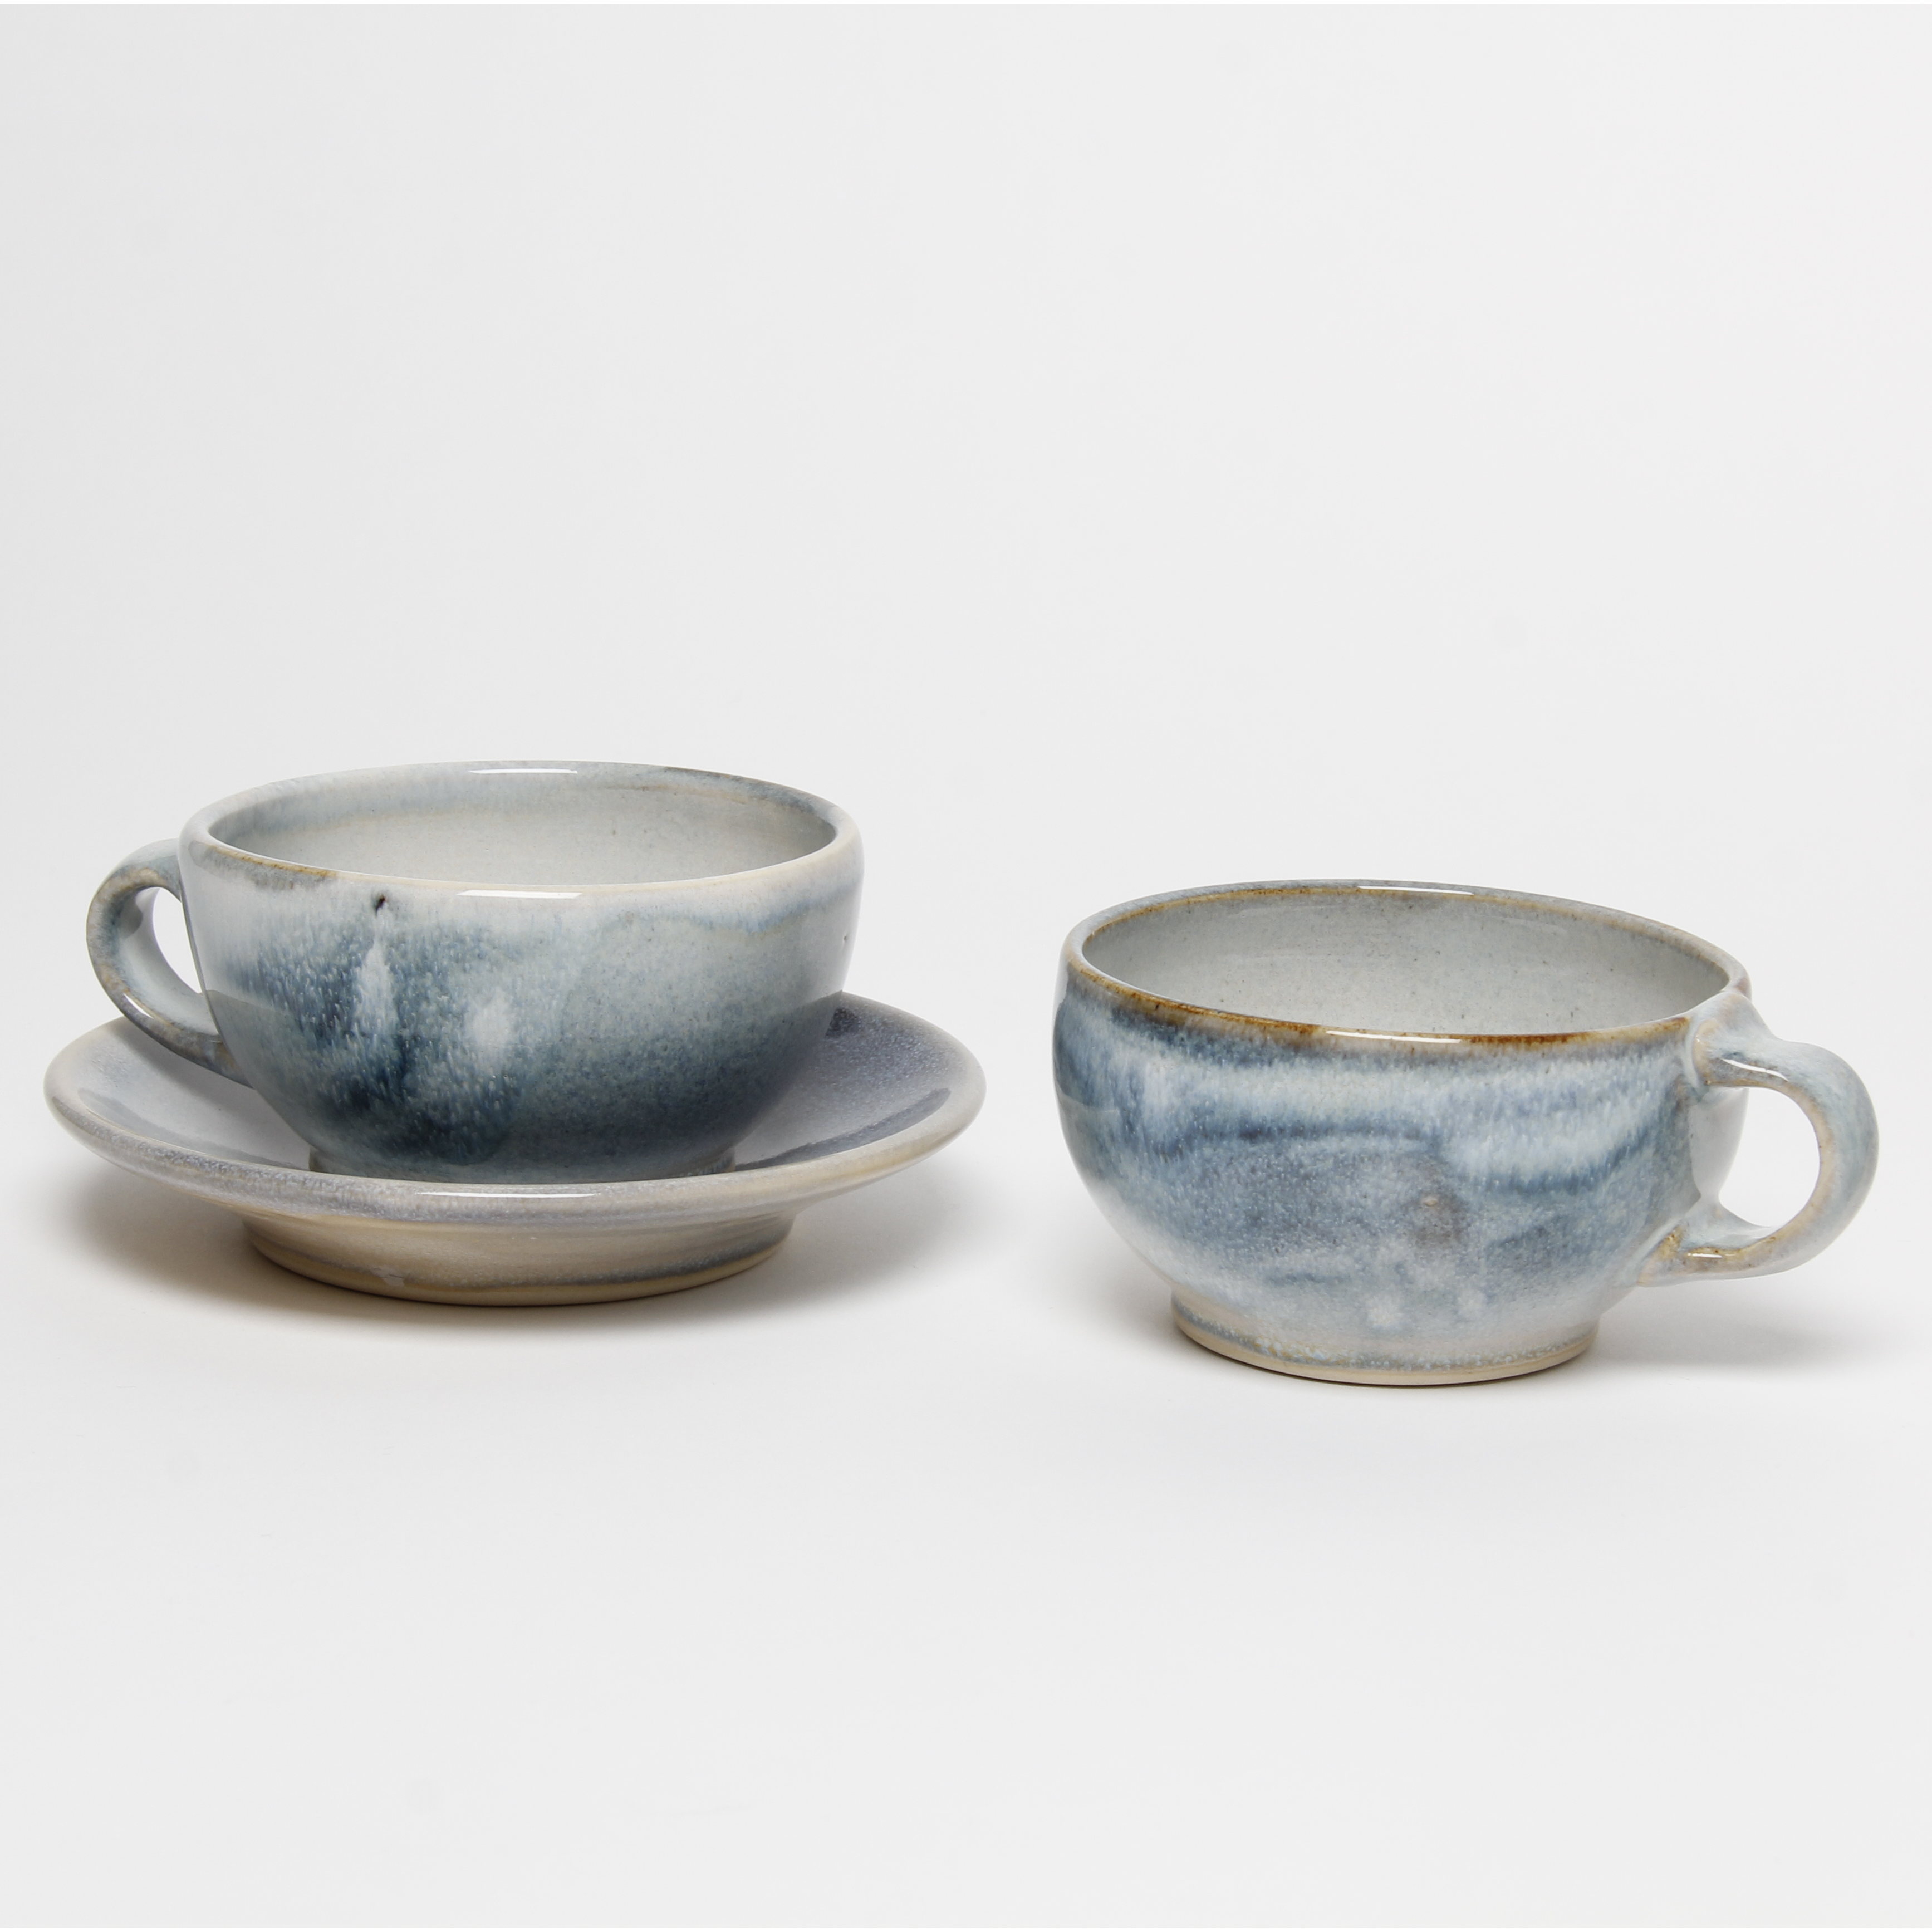 Teresa Dunlop: Cappuccino Cup Product Image 2 of 6